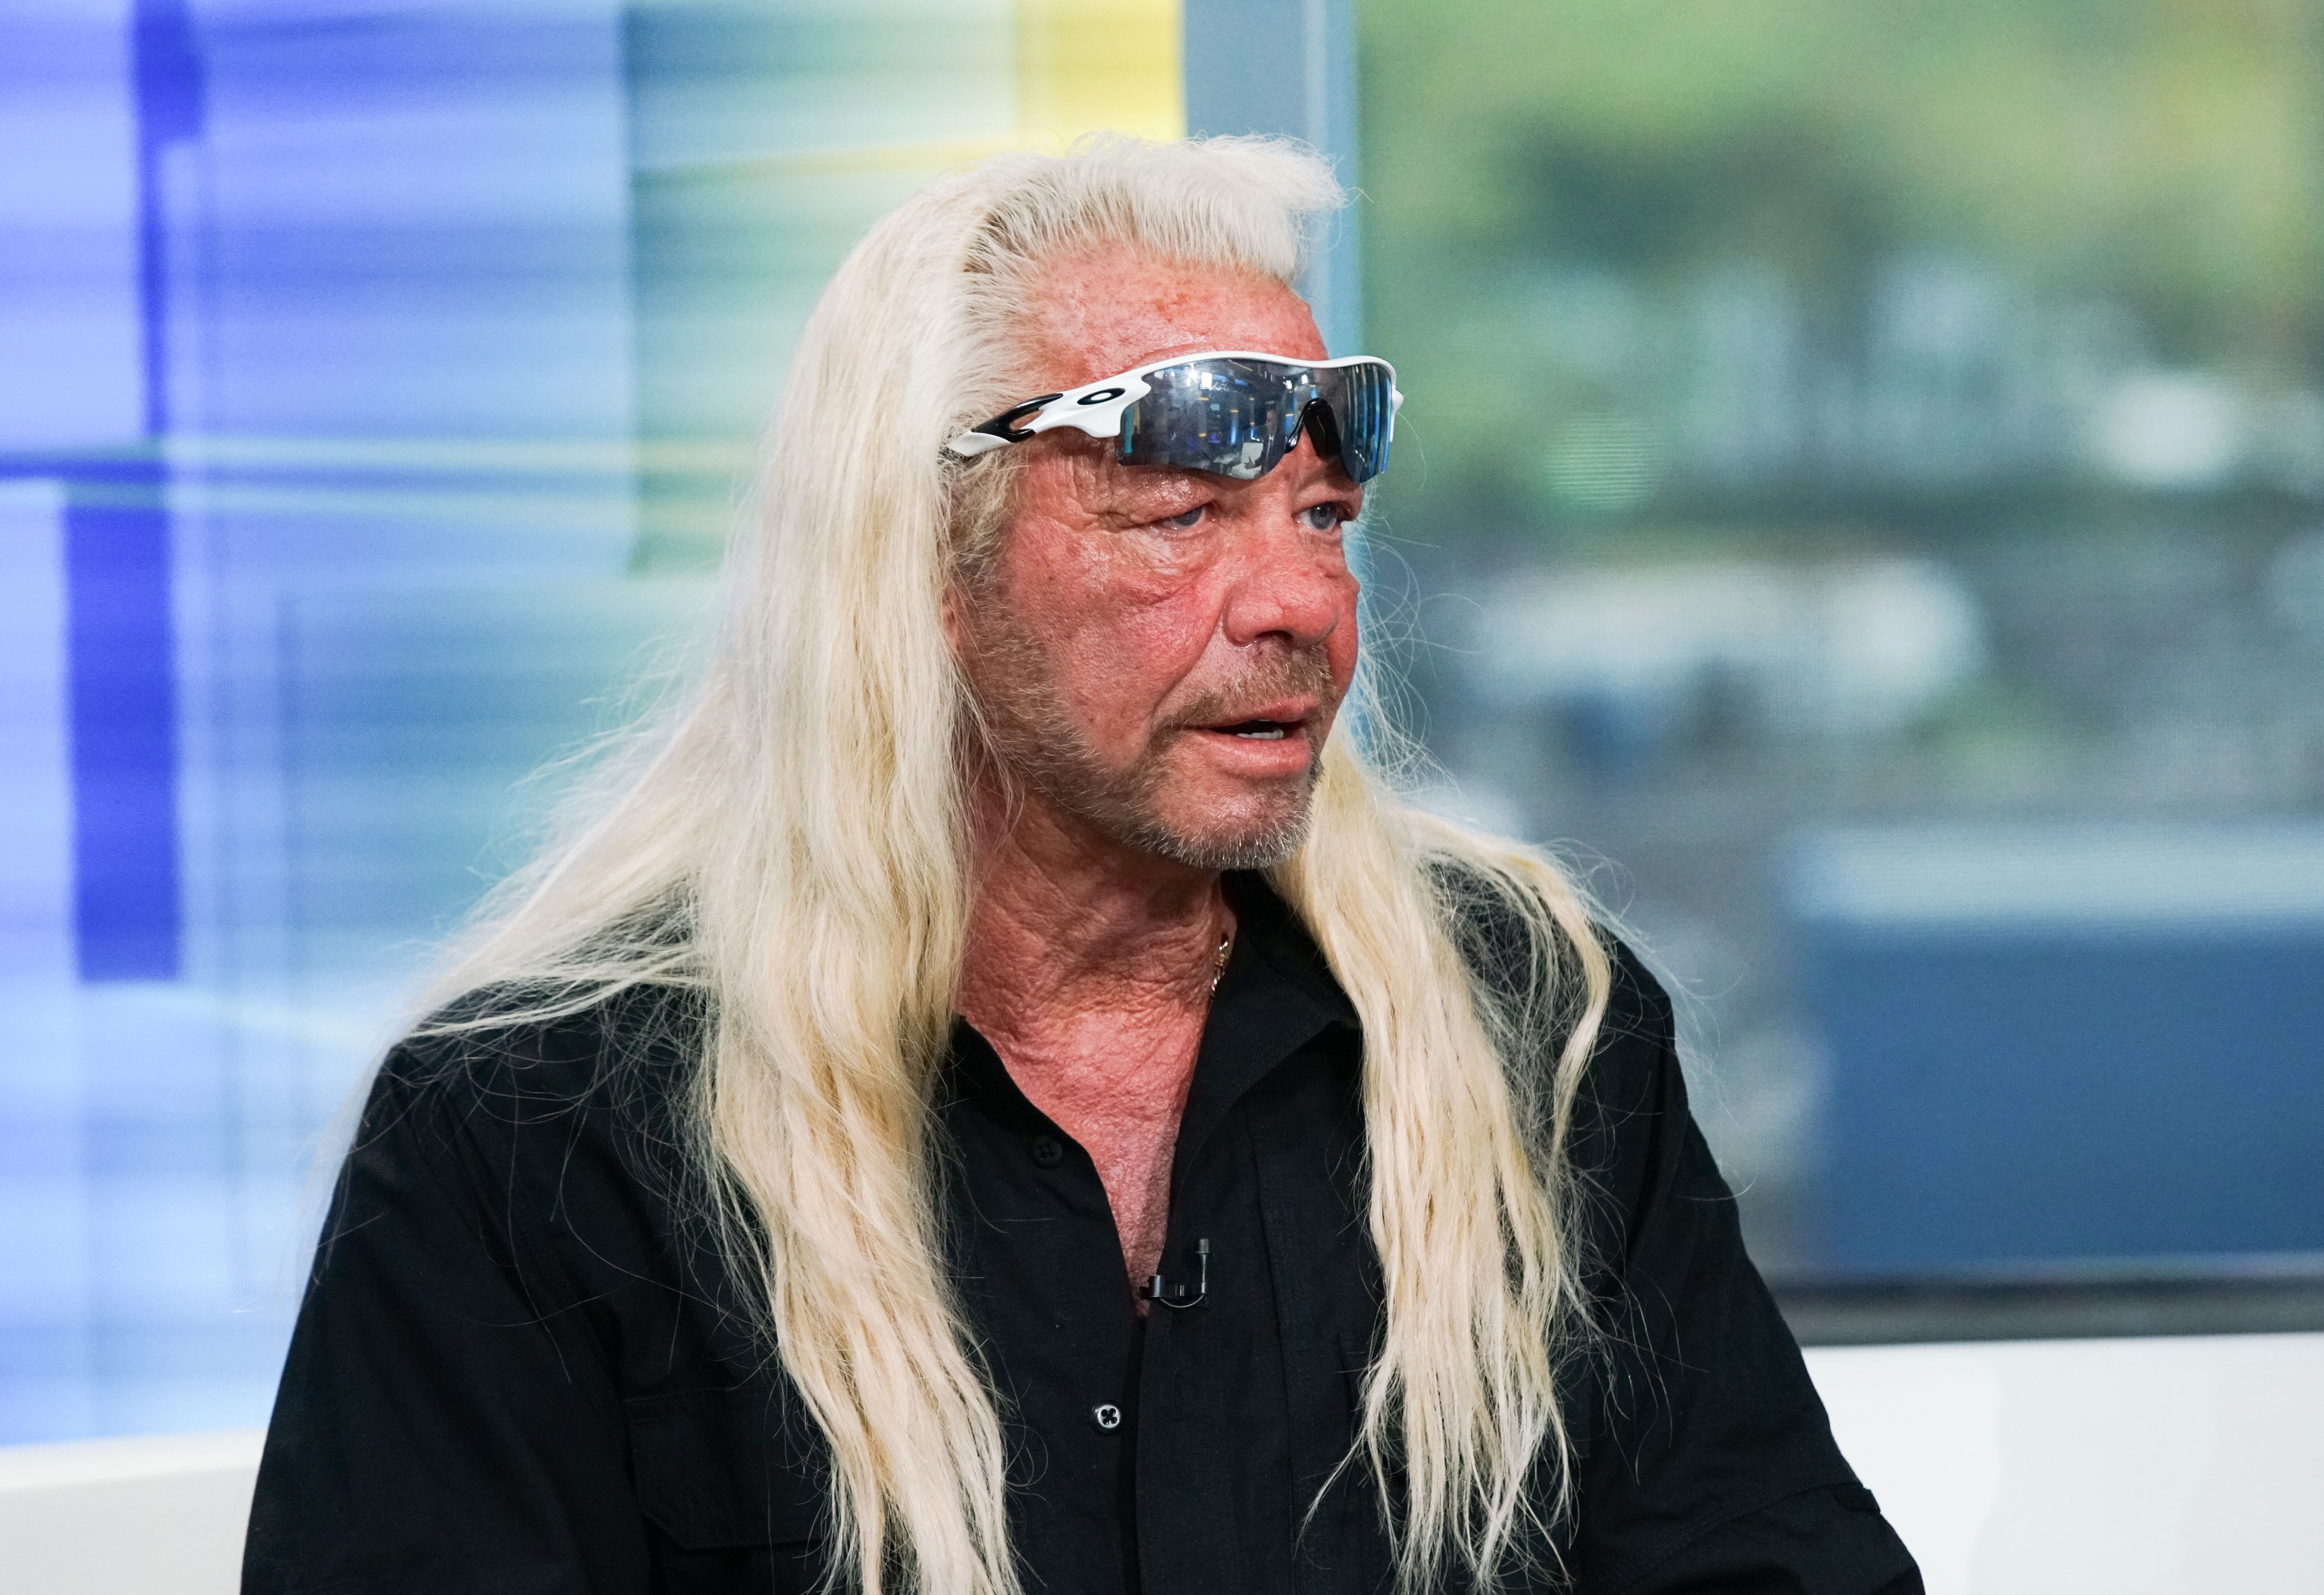 :TV personality Duane Chapman aka Dog the Bounty Hunter visits "FOX & Friends" at FOX Studios on August 28, 2019 in New York City | Photo: Getty Images